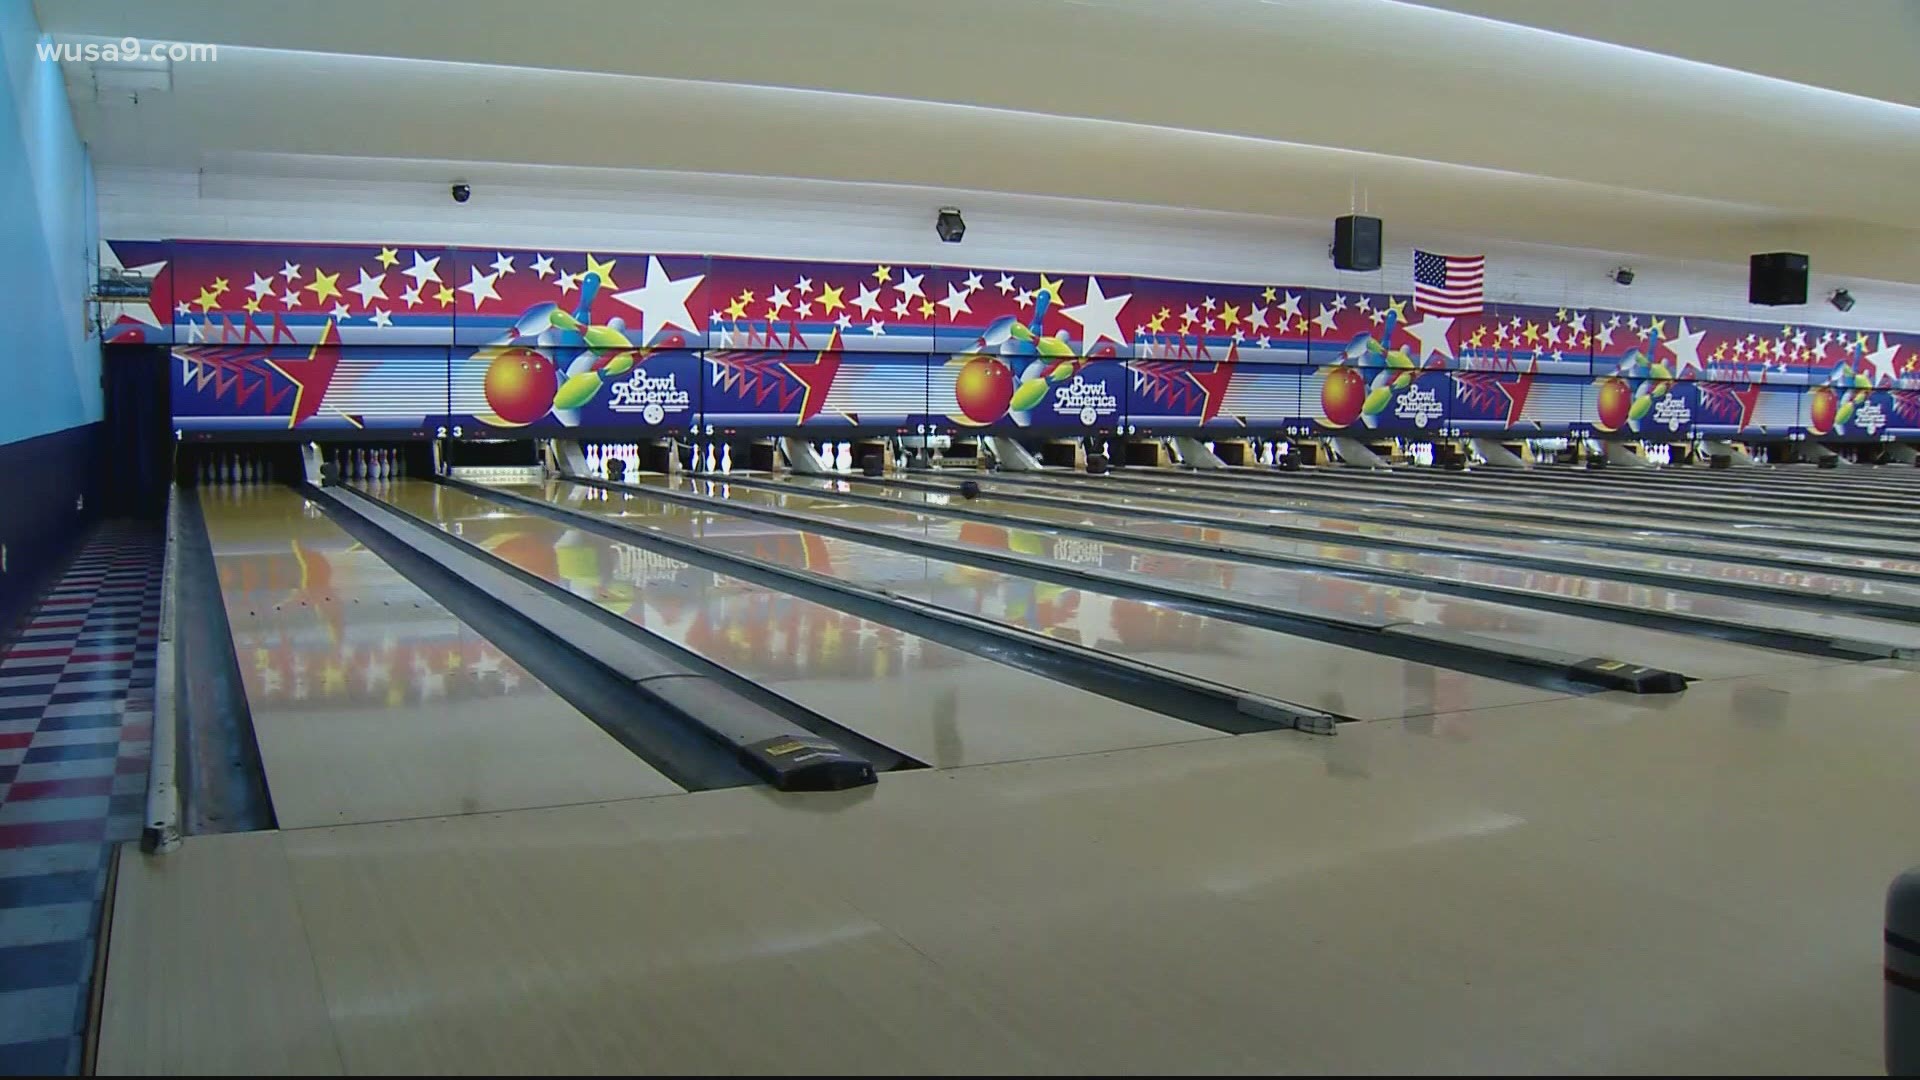 The incident happened around 7 p.m. at the Bowl America located at 7155 Ritchie Highway, police say.